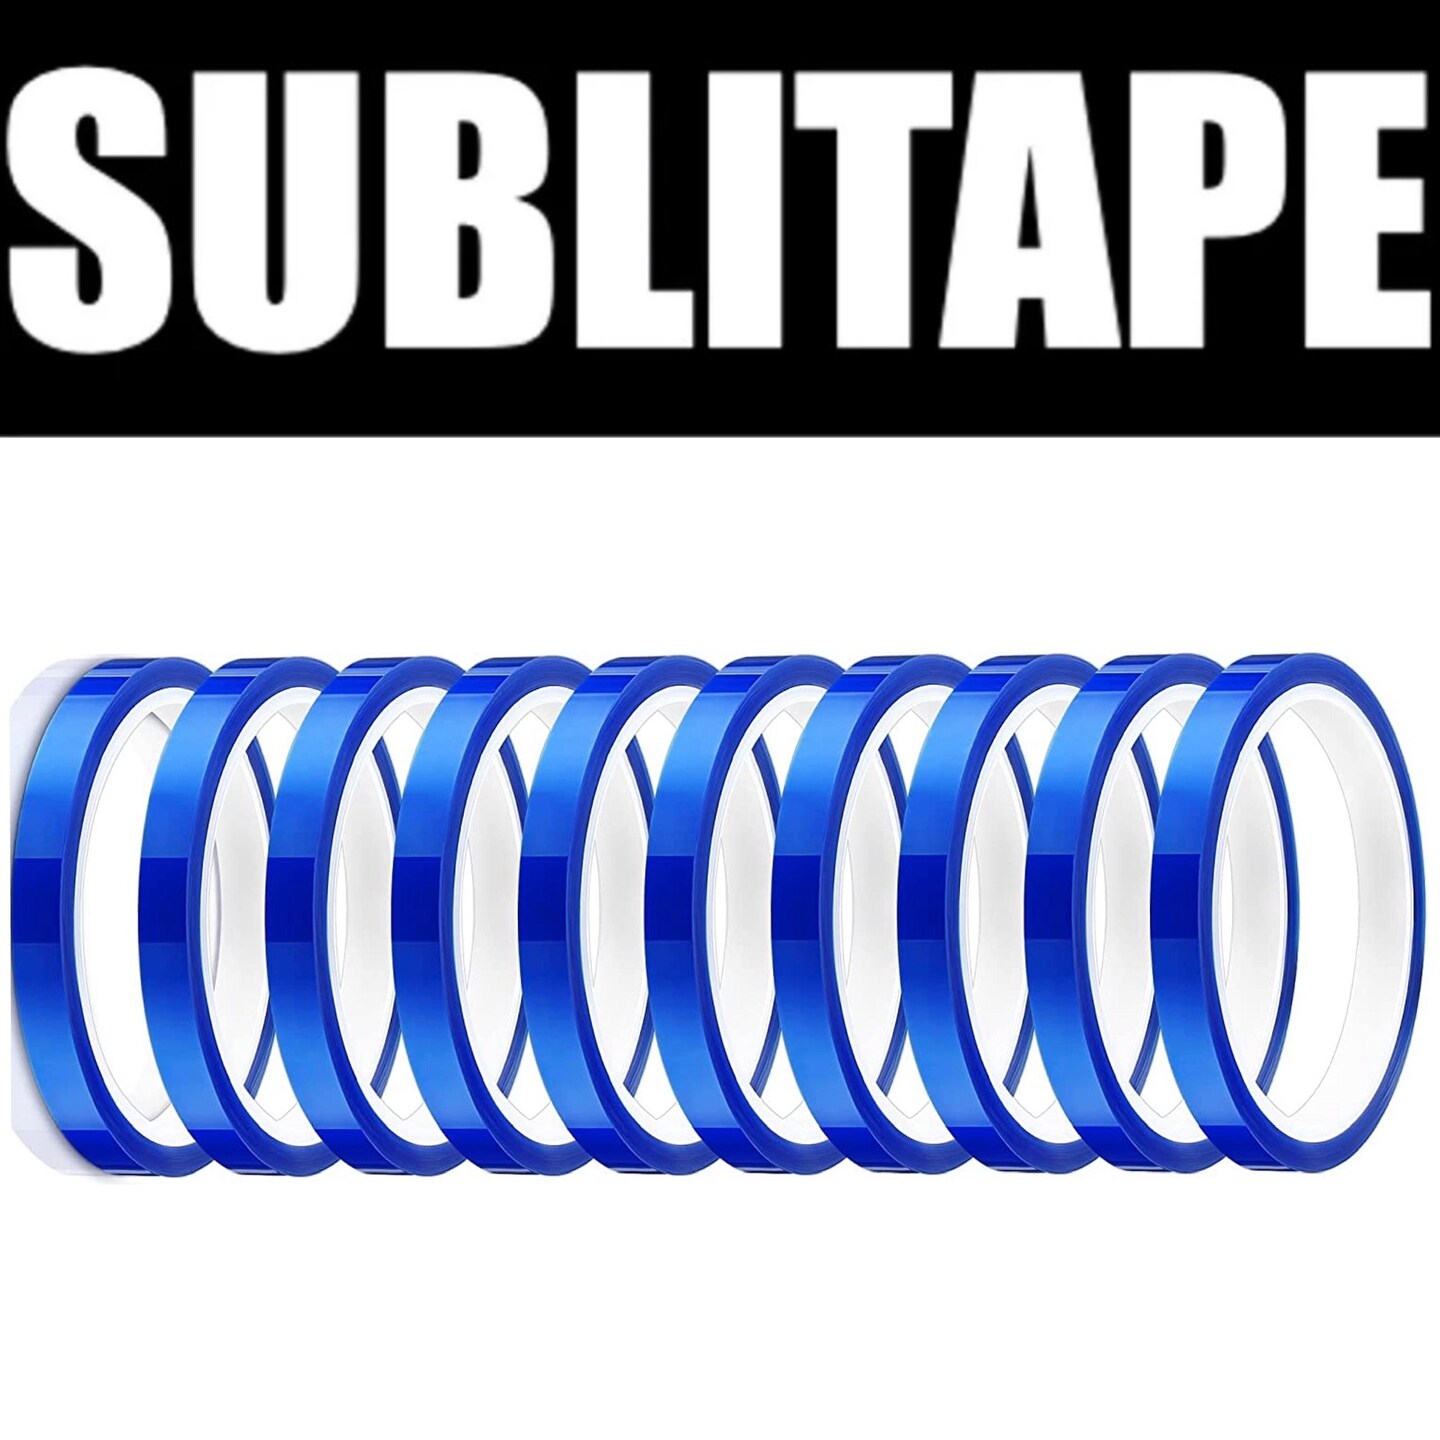 10 rolls Heat resistant tapes sublimation Press Transfer Thermal Tape 6mmx30m SUBLITAPE BLUE